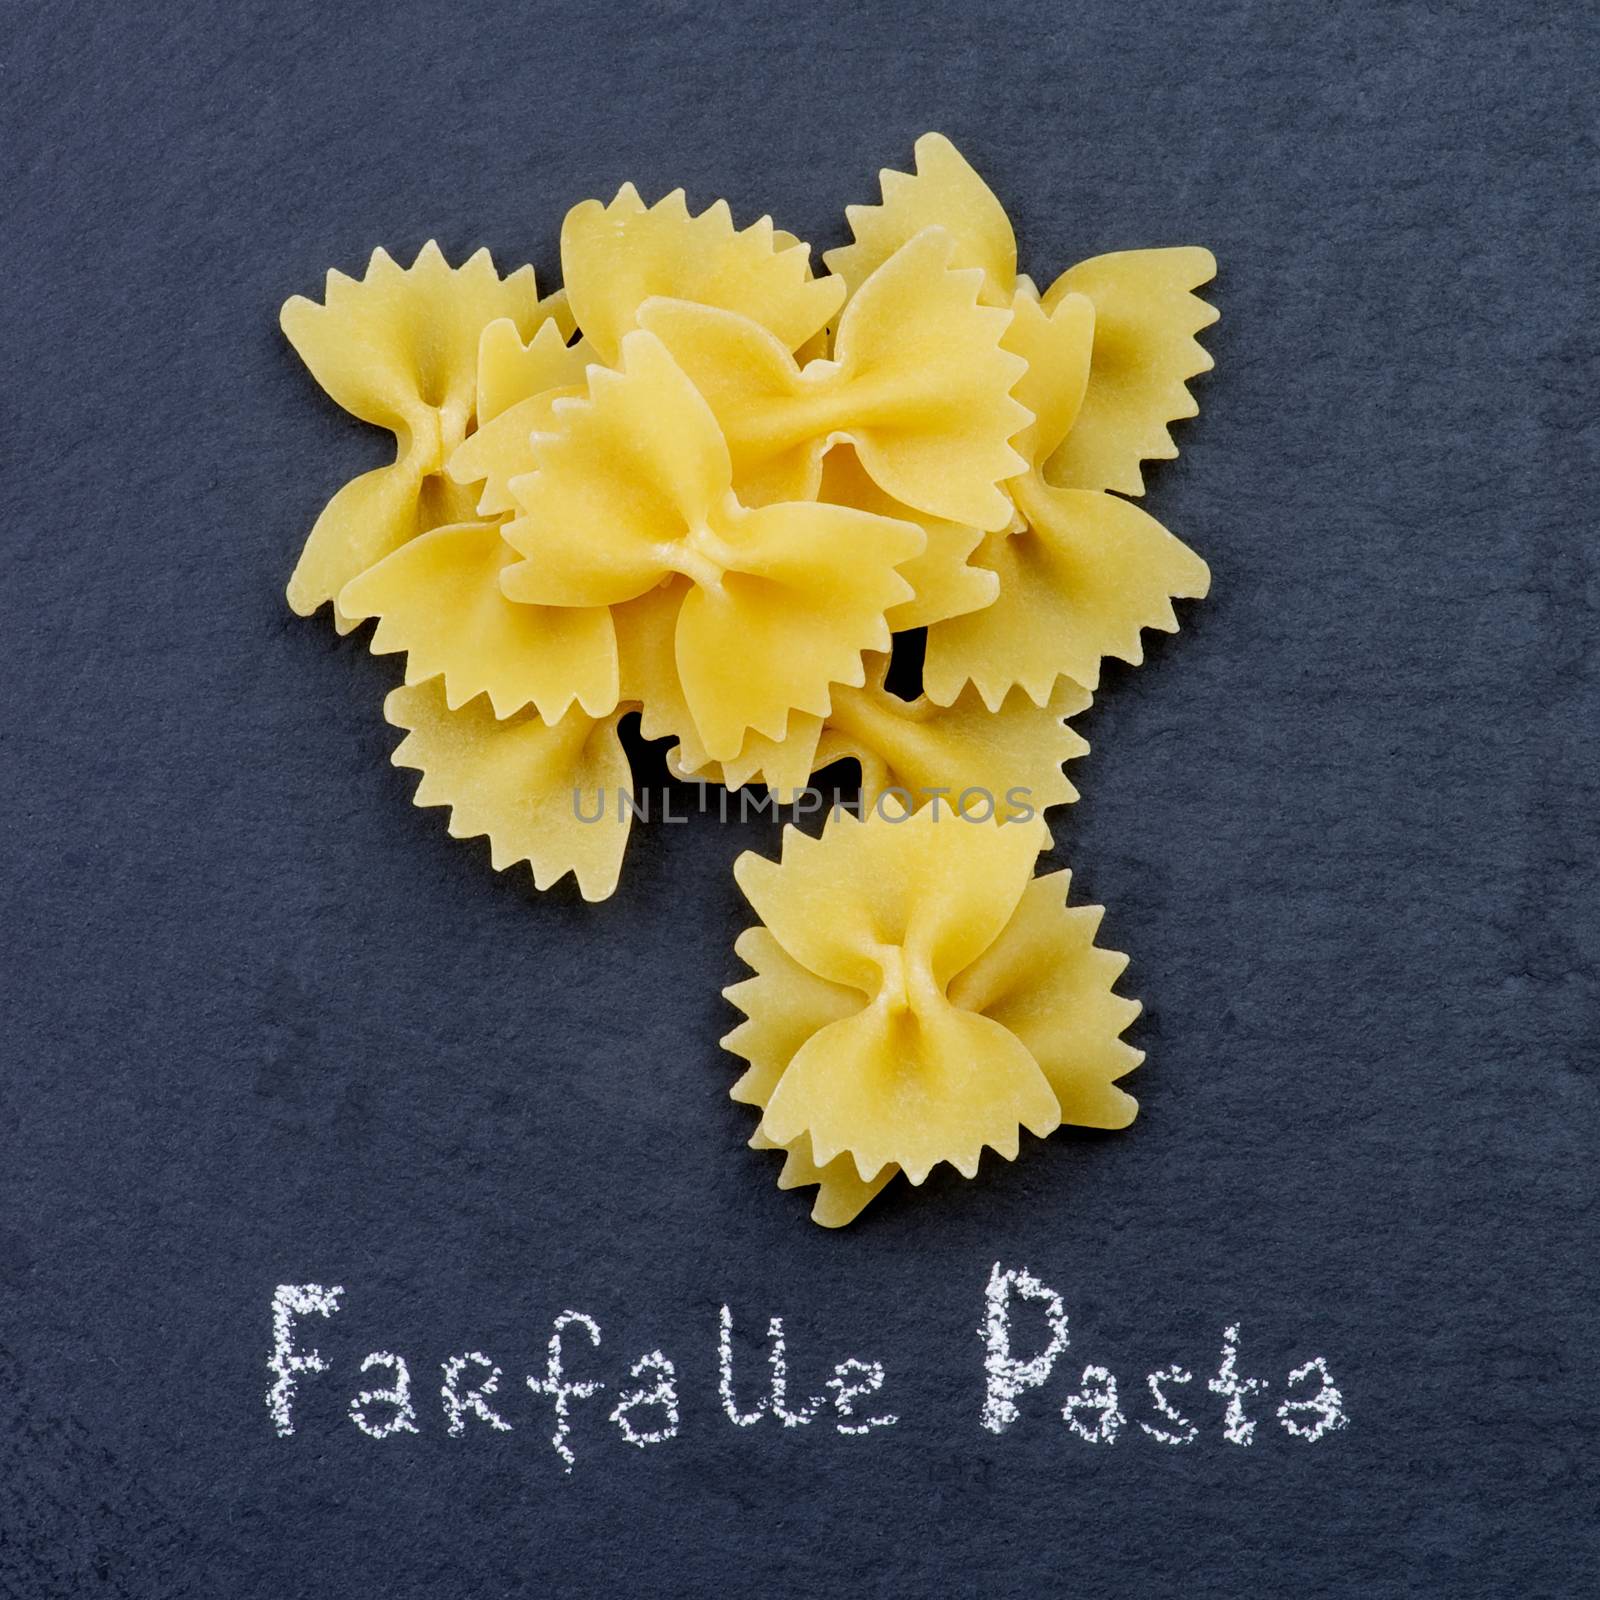 Heap of Raw Farfalle Pasta with Inscription closeup on Black Stone background